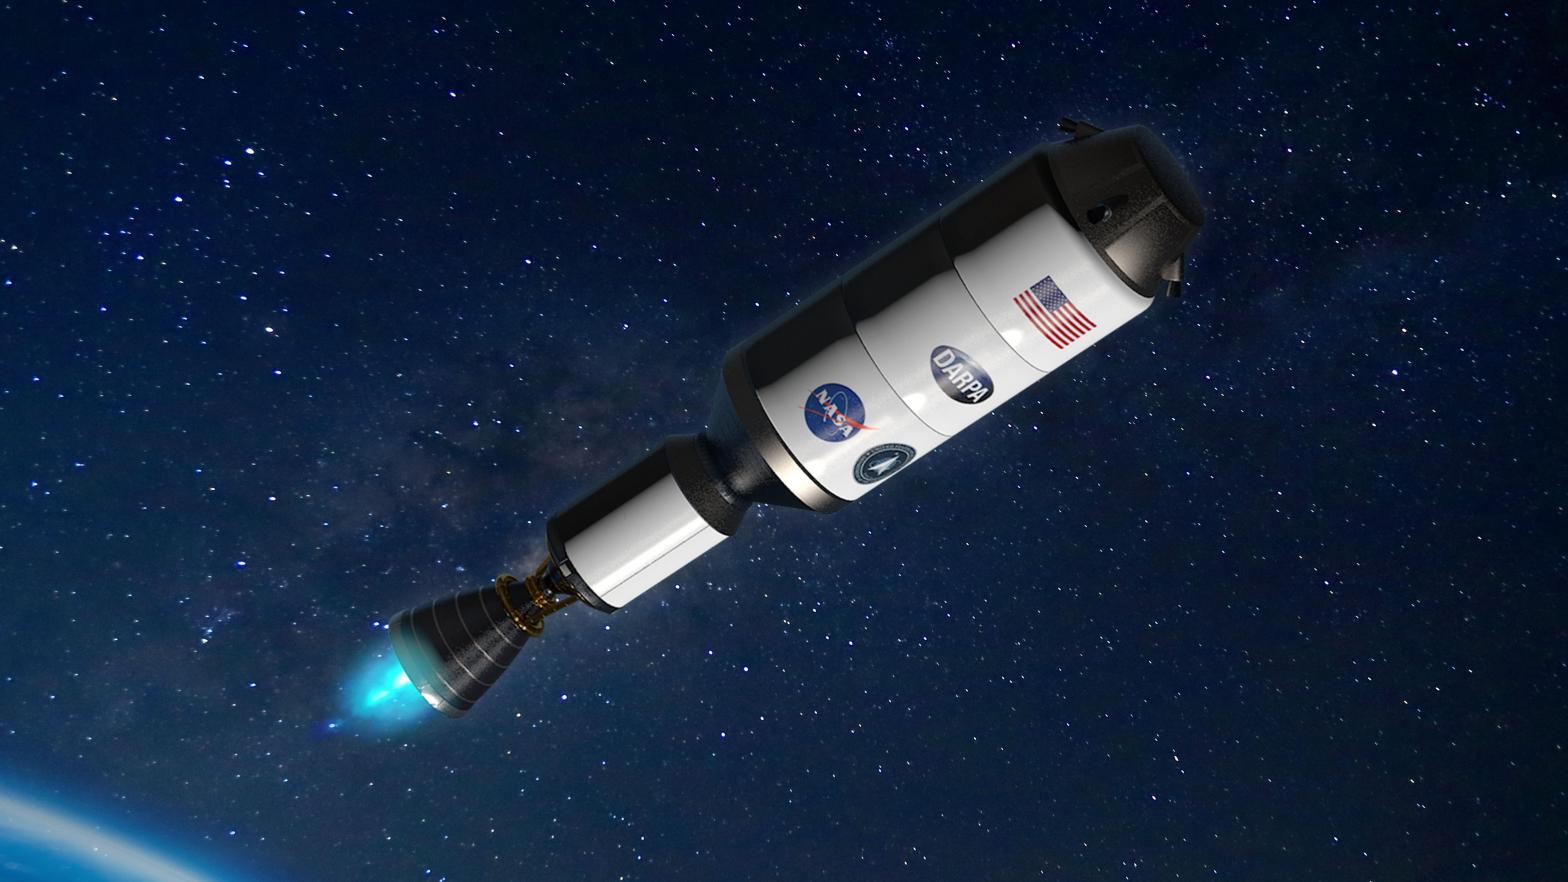 An artist's impression of the DRACO spacecraft, which will feature the new nuclear thermal rocket engine.  (Image: DARPA)